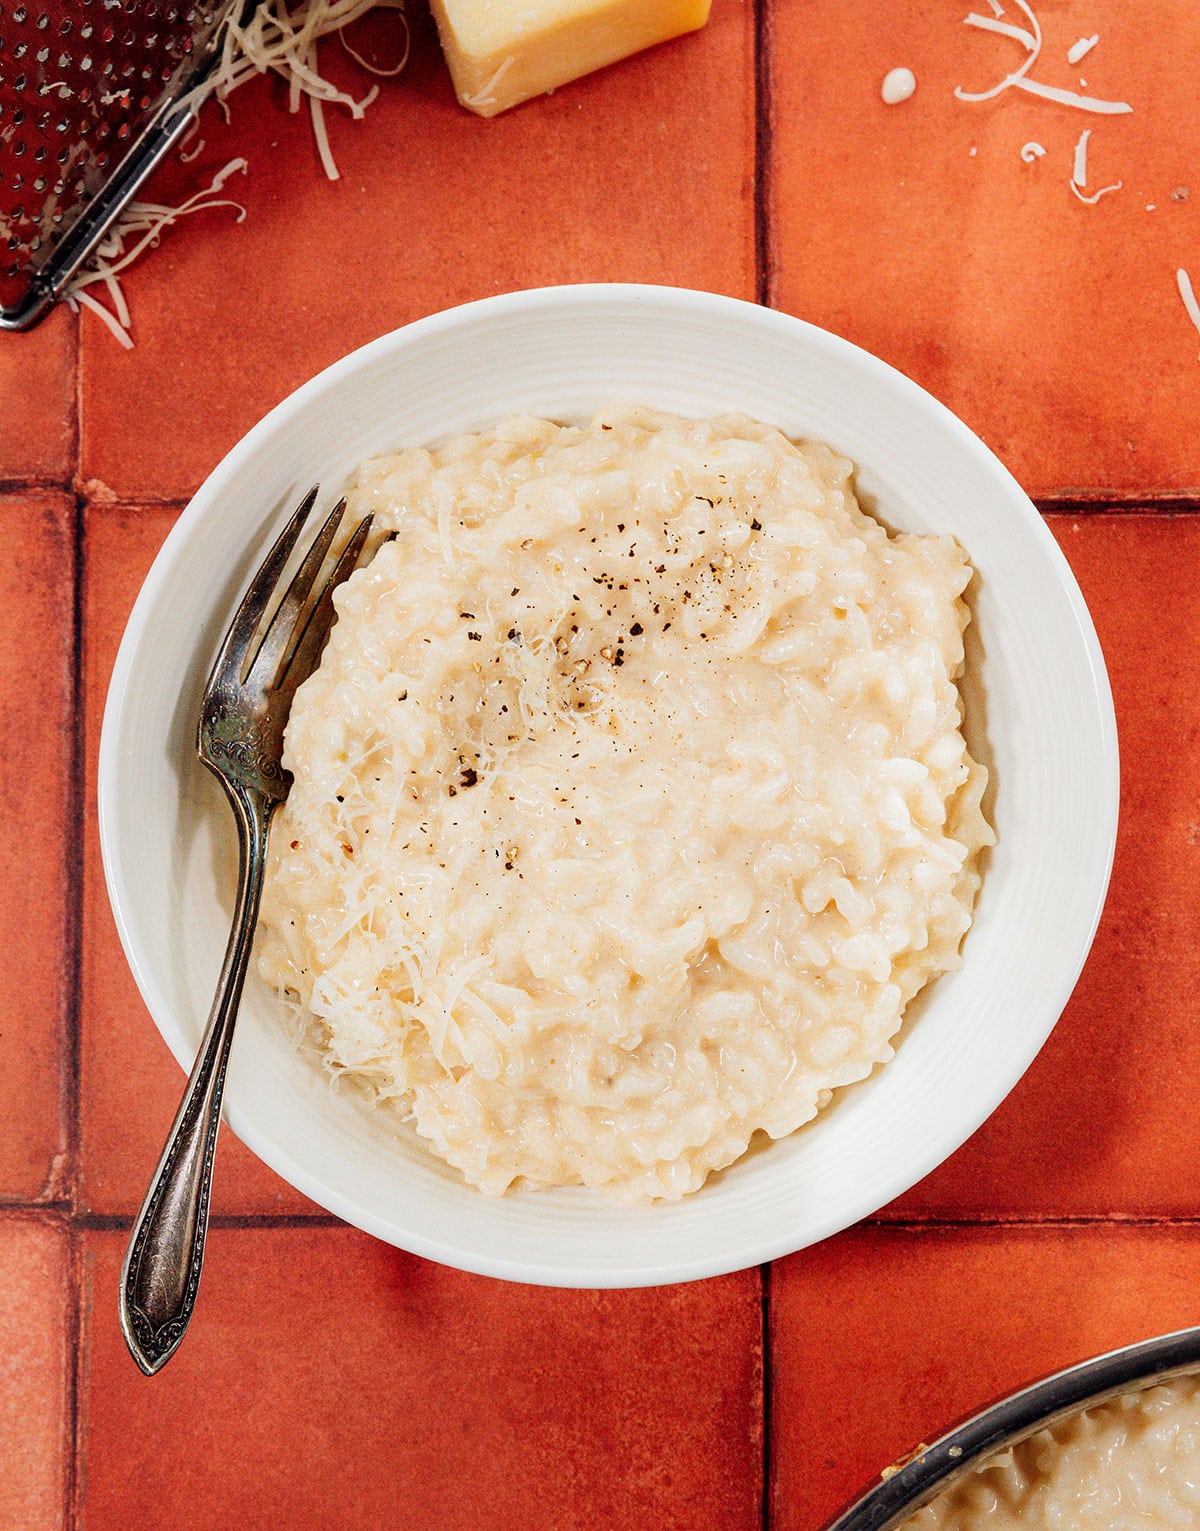 Risotto in a bowl with a spoon.